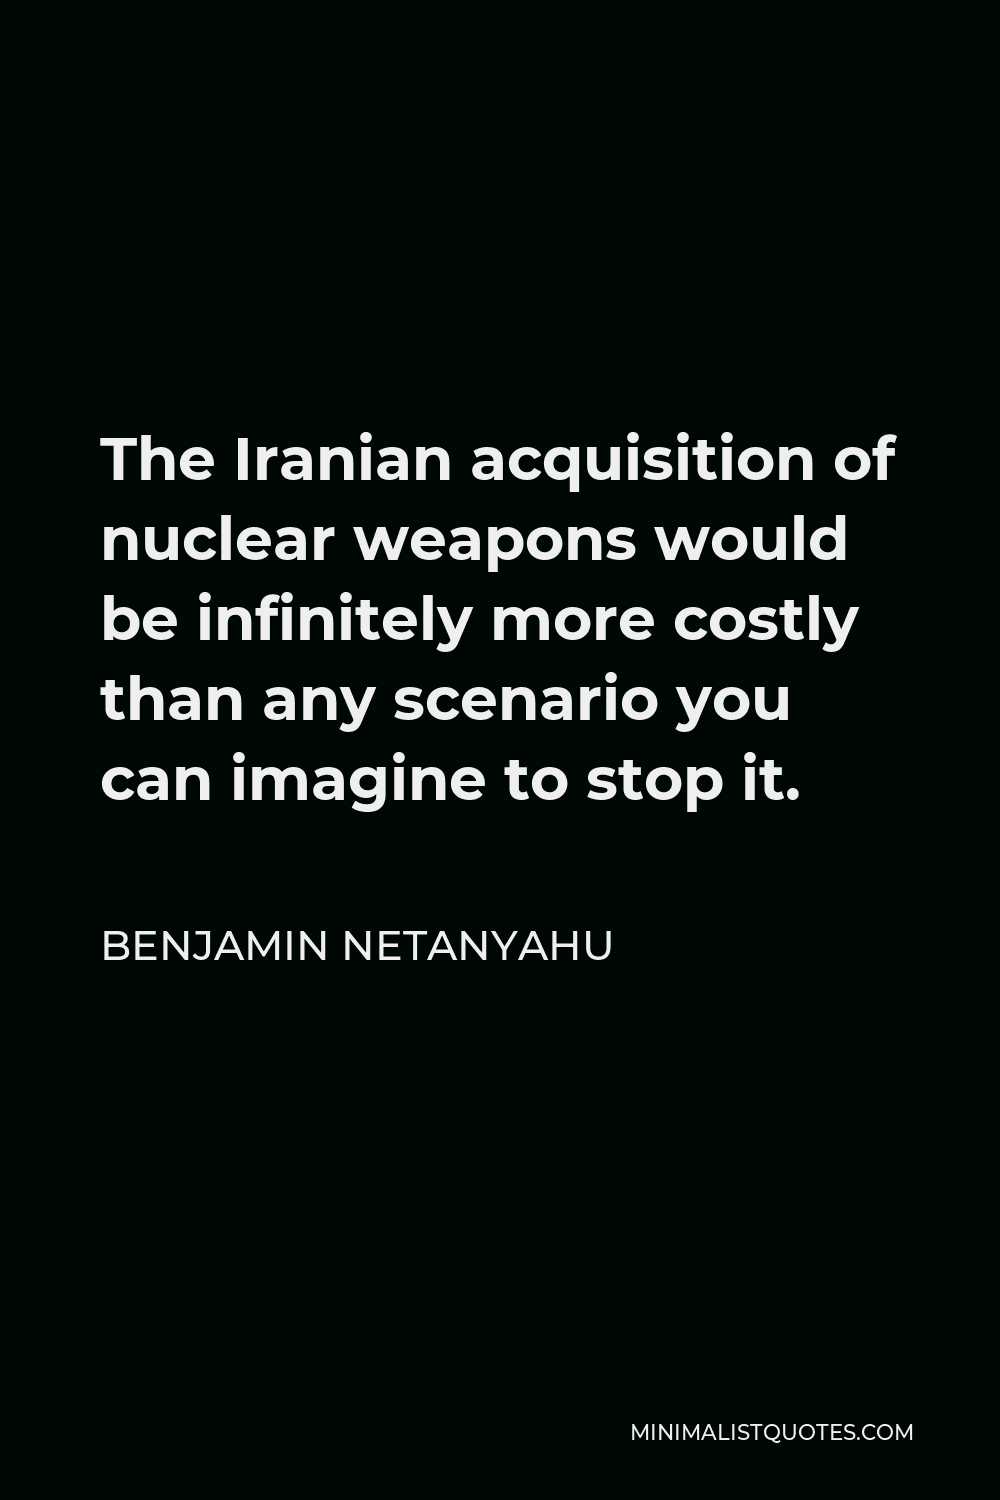 Benjamin Netanyahu Quote - The Iranian acquisition of nuclear weapons would be infinitely more costly than any scenario you can imagine to stop it.